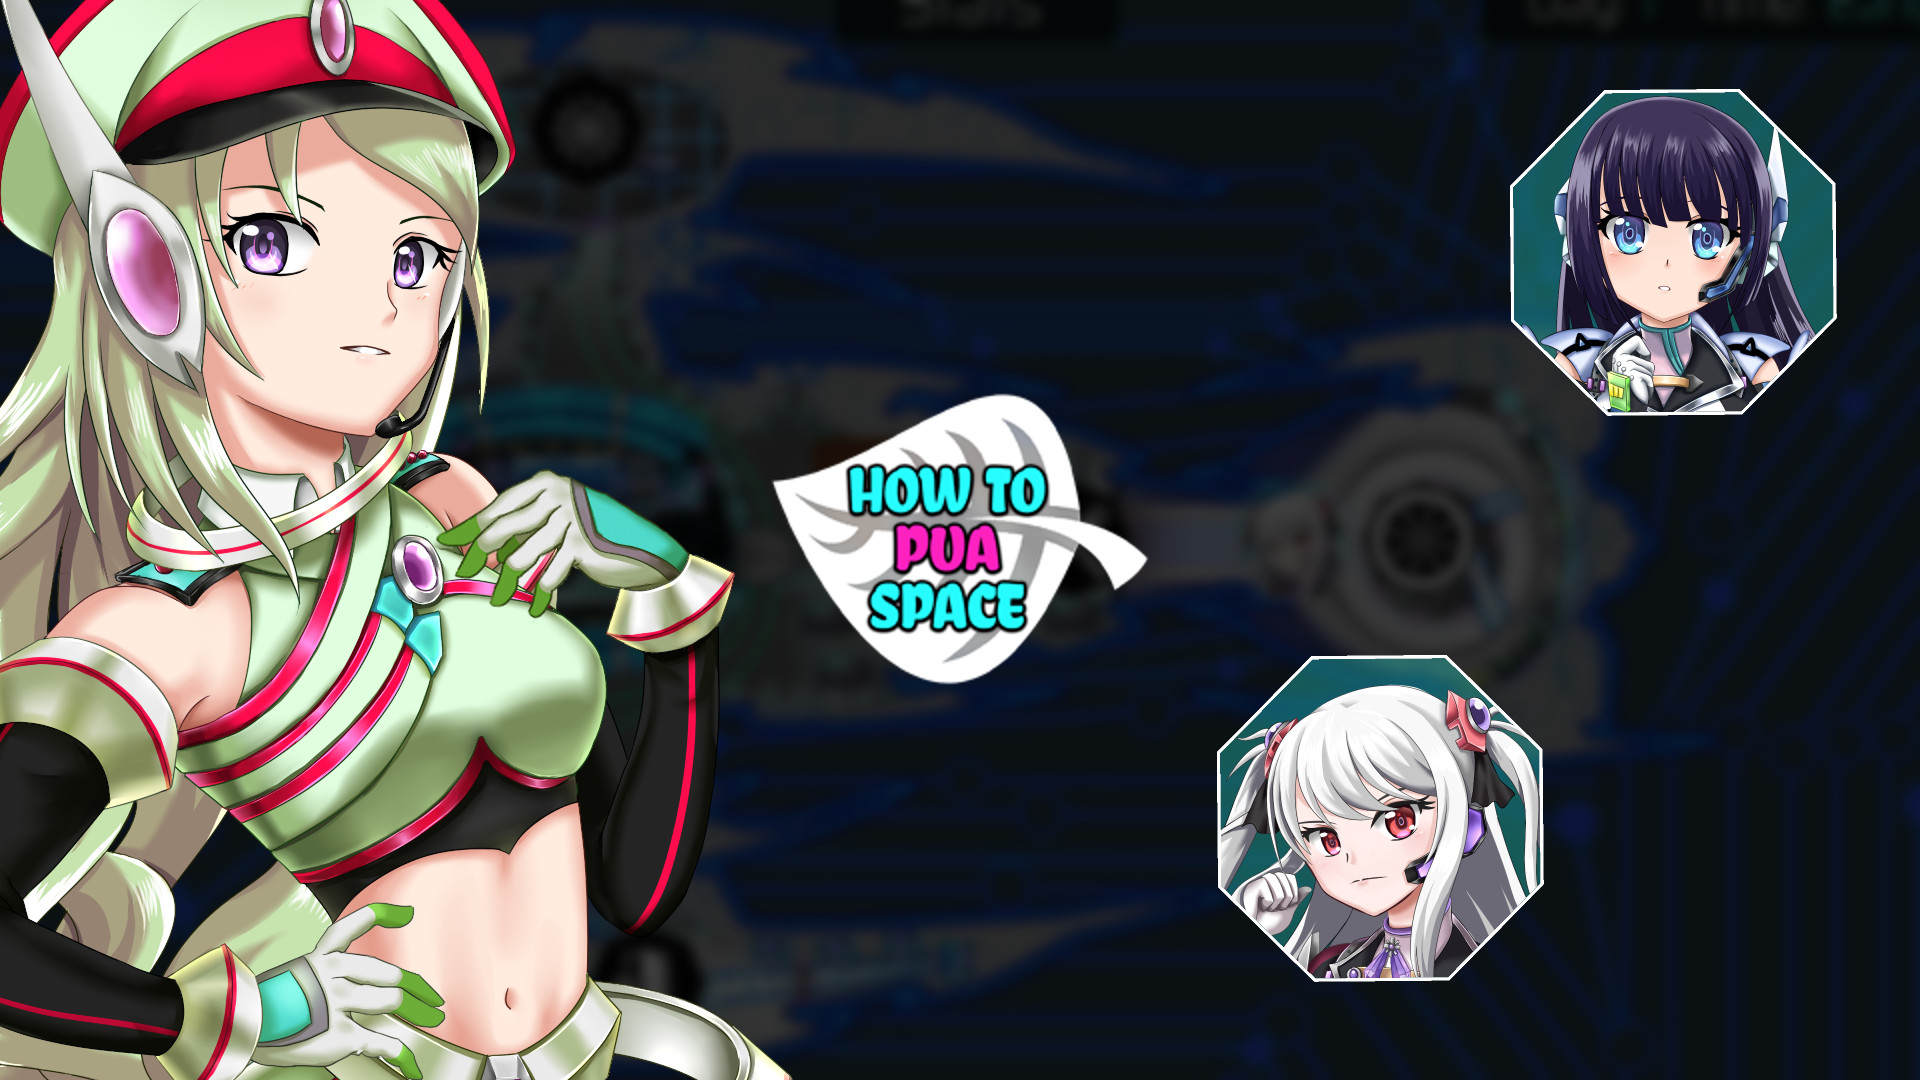 Set Sail For The Stars In Nutaku's Latest Game - Pua Space , HD Wallpaper & Backgrounds